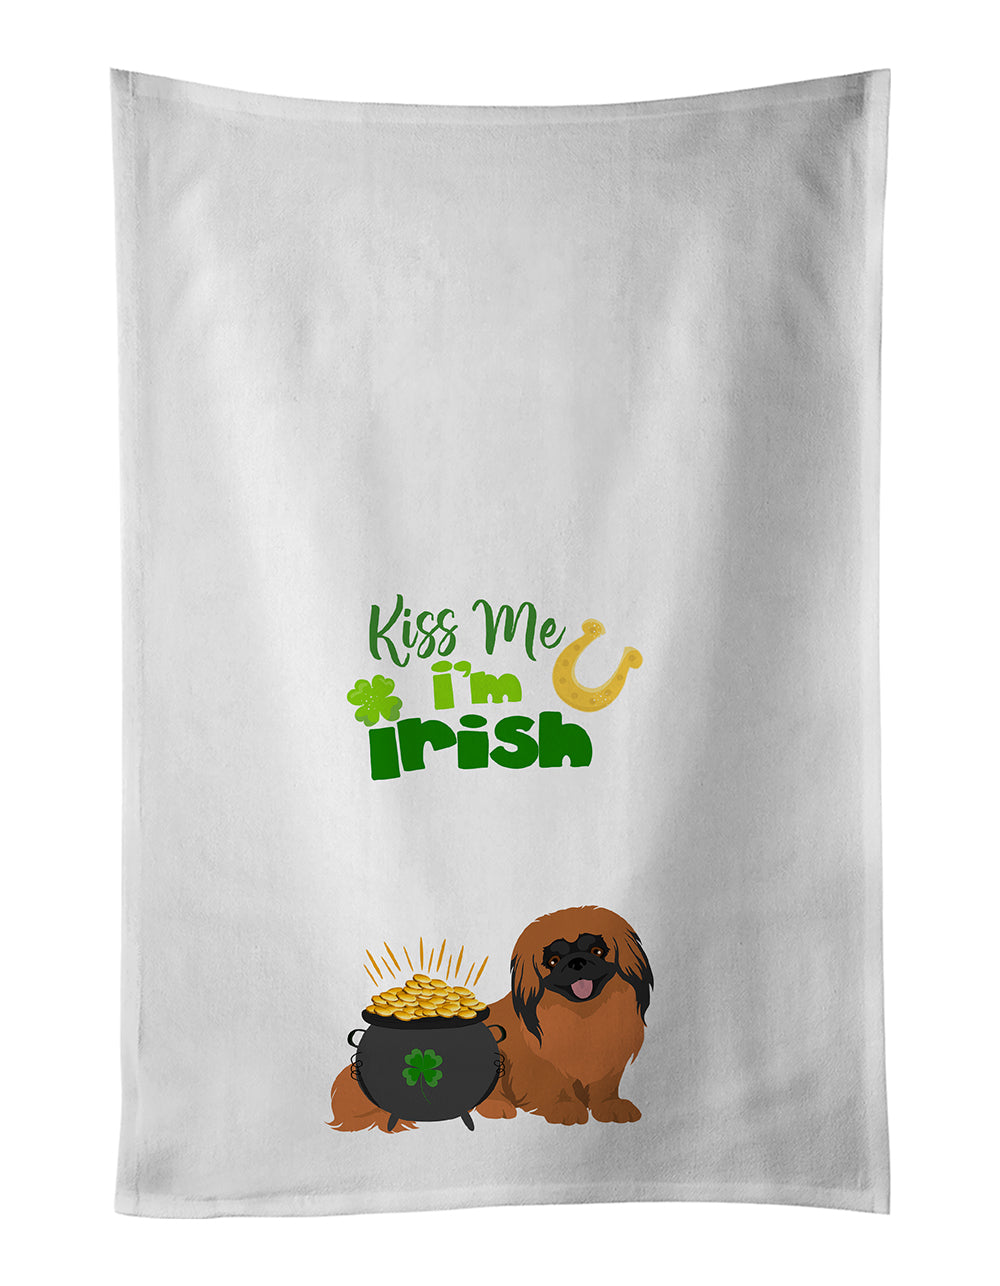 Buy this Red Pekingese St. Patrick's Day White Kitchen Towel Set of 2 Dish Towels